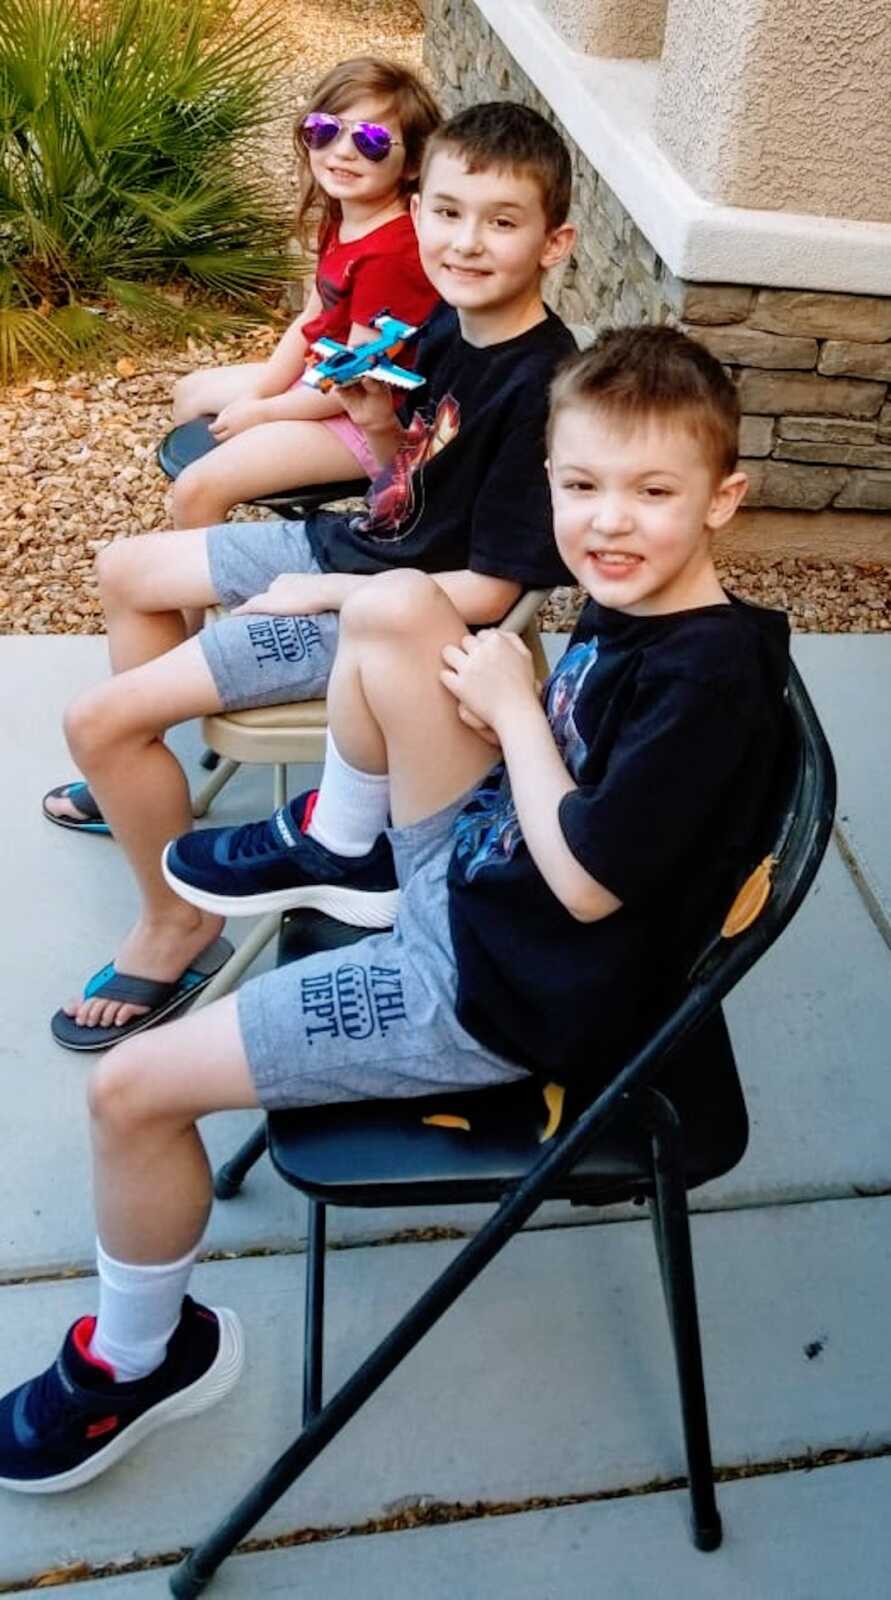 two boys with Duchenne's sit in folding chairs along with their sister, all of them are looking towards the camera, smiling